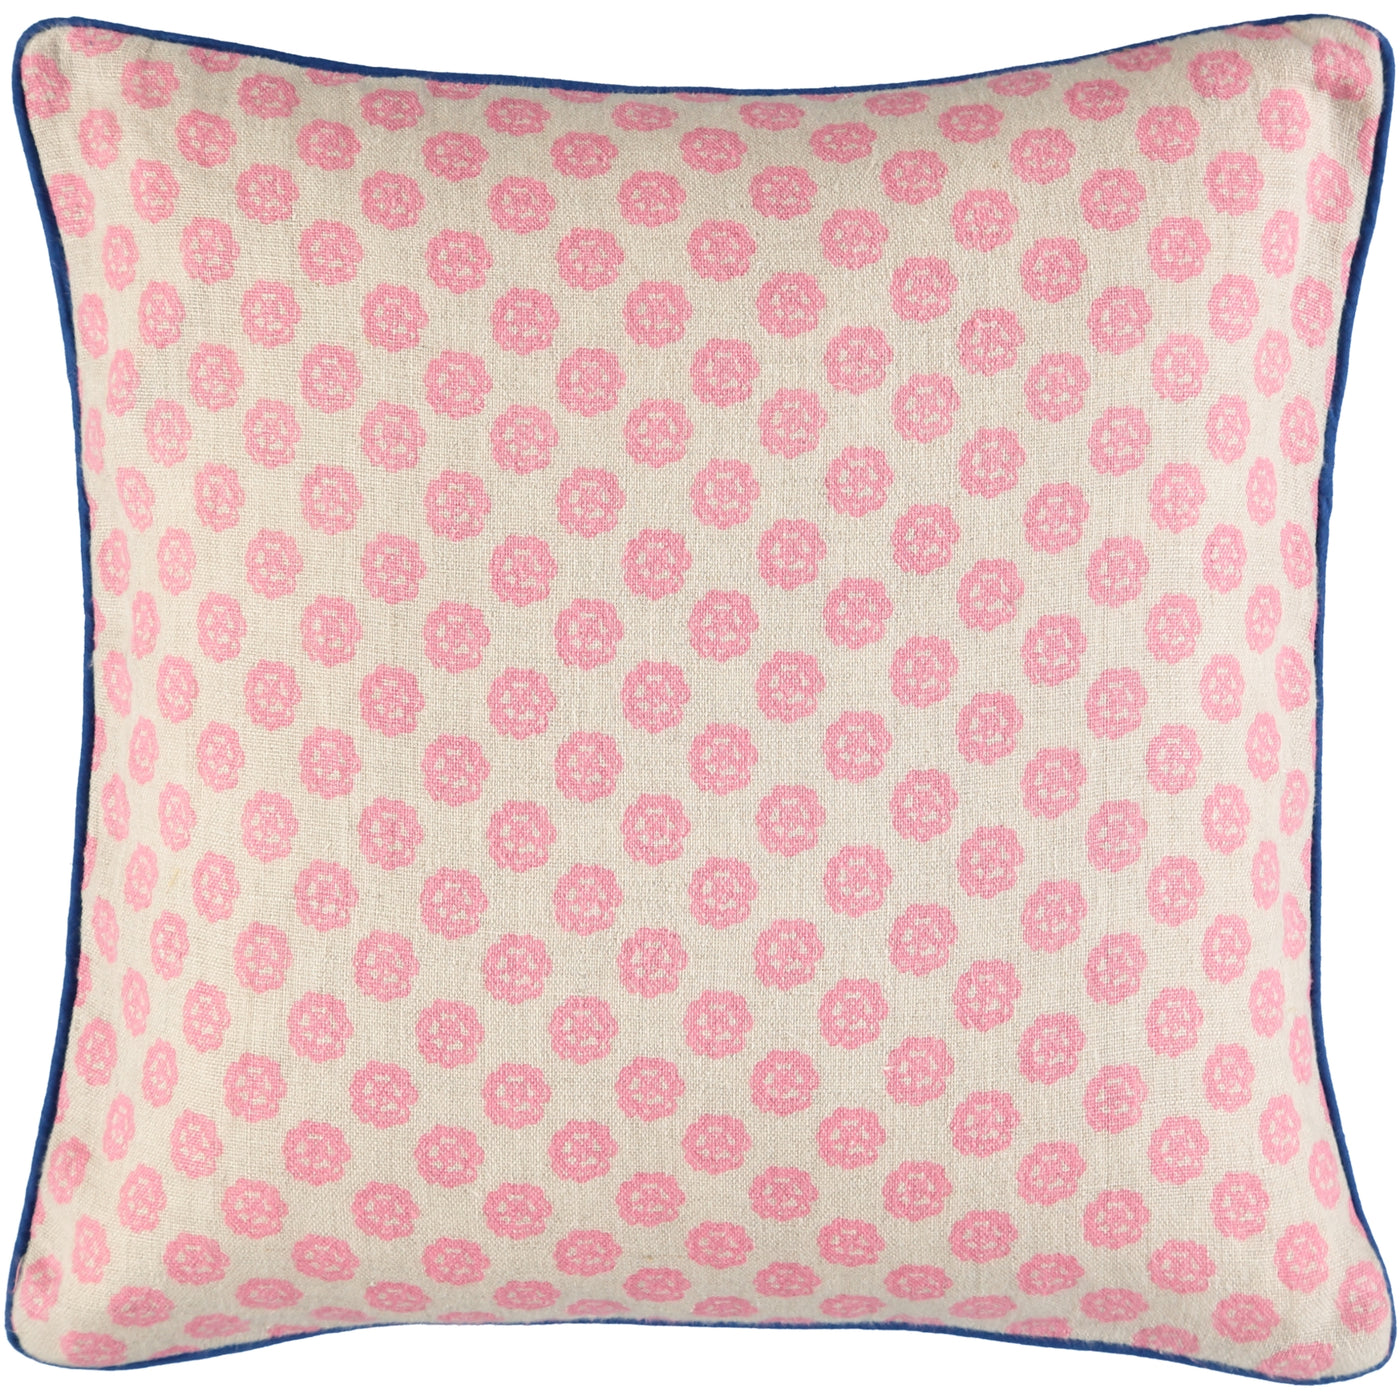 kitty-holmes-pink-clover-print-floral-cushion-cover with-bright-blue-piping